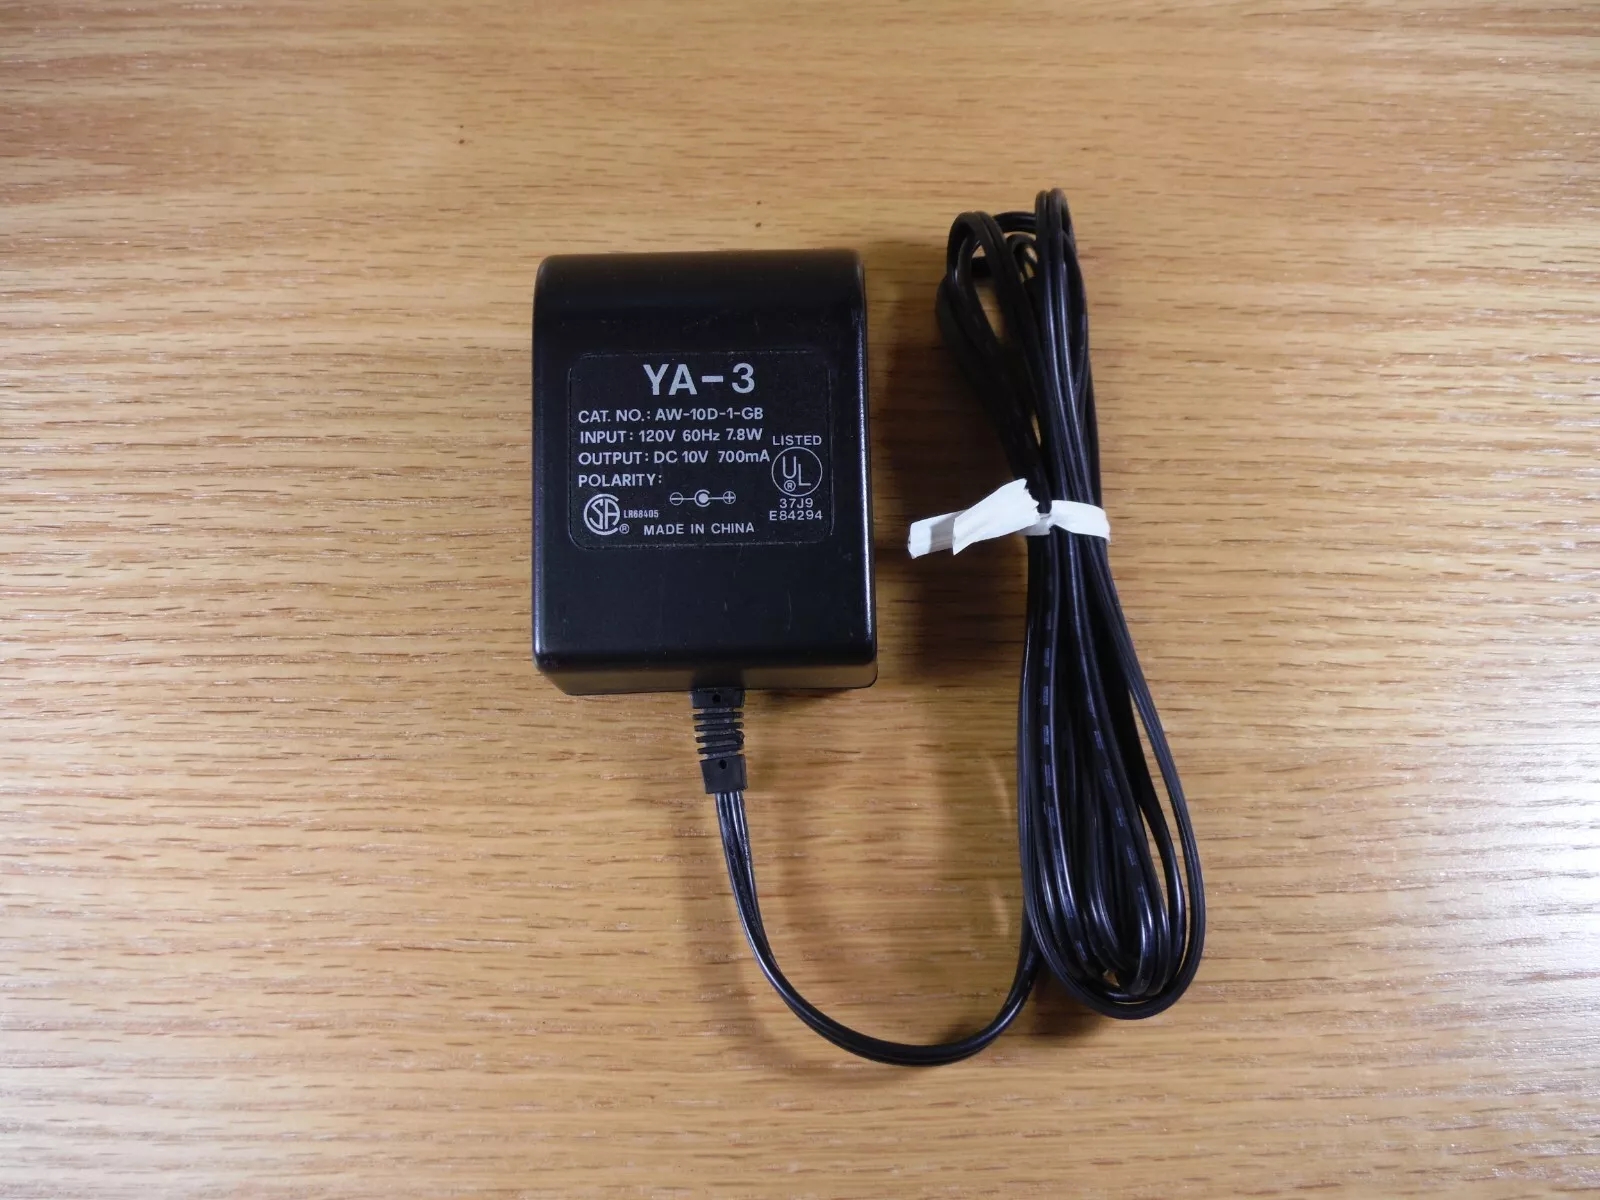 *Brand NEW*Yamaha YA-3 DC 10V 700mA AC Adapter AW-10D-1-GB for Center Positive Supply Tested Power Supply